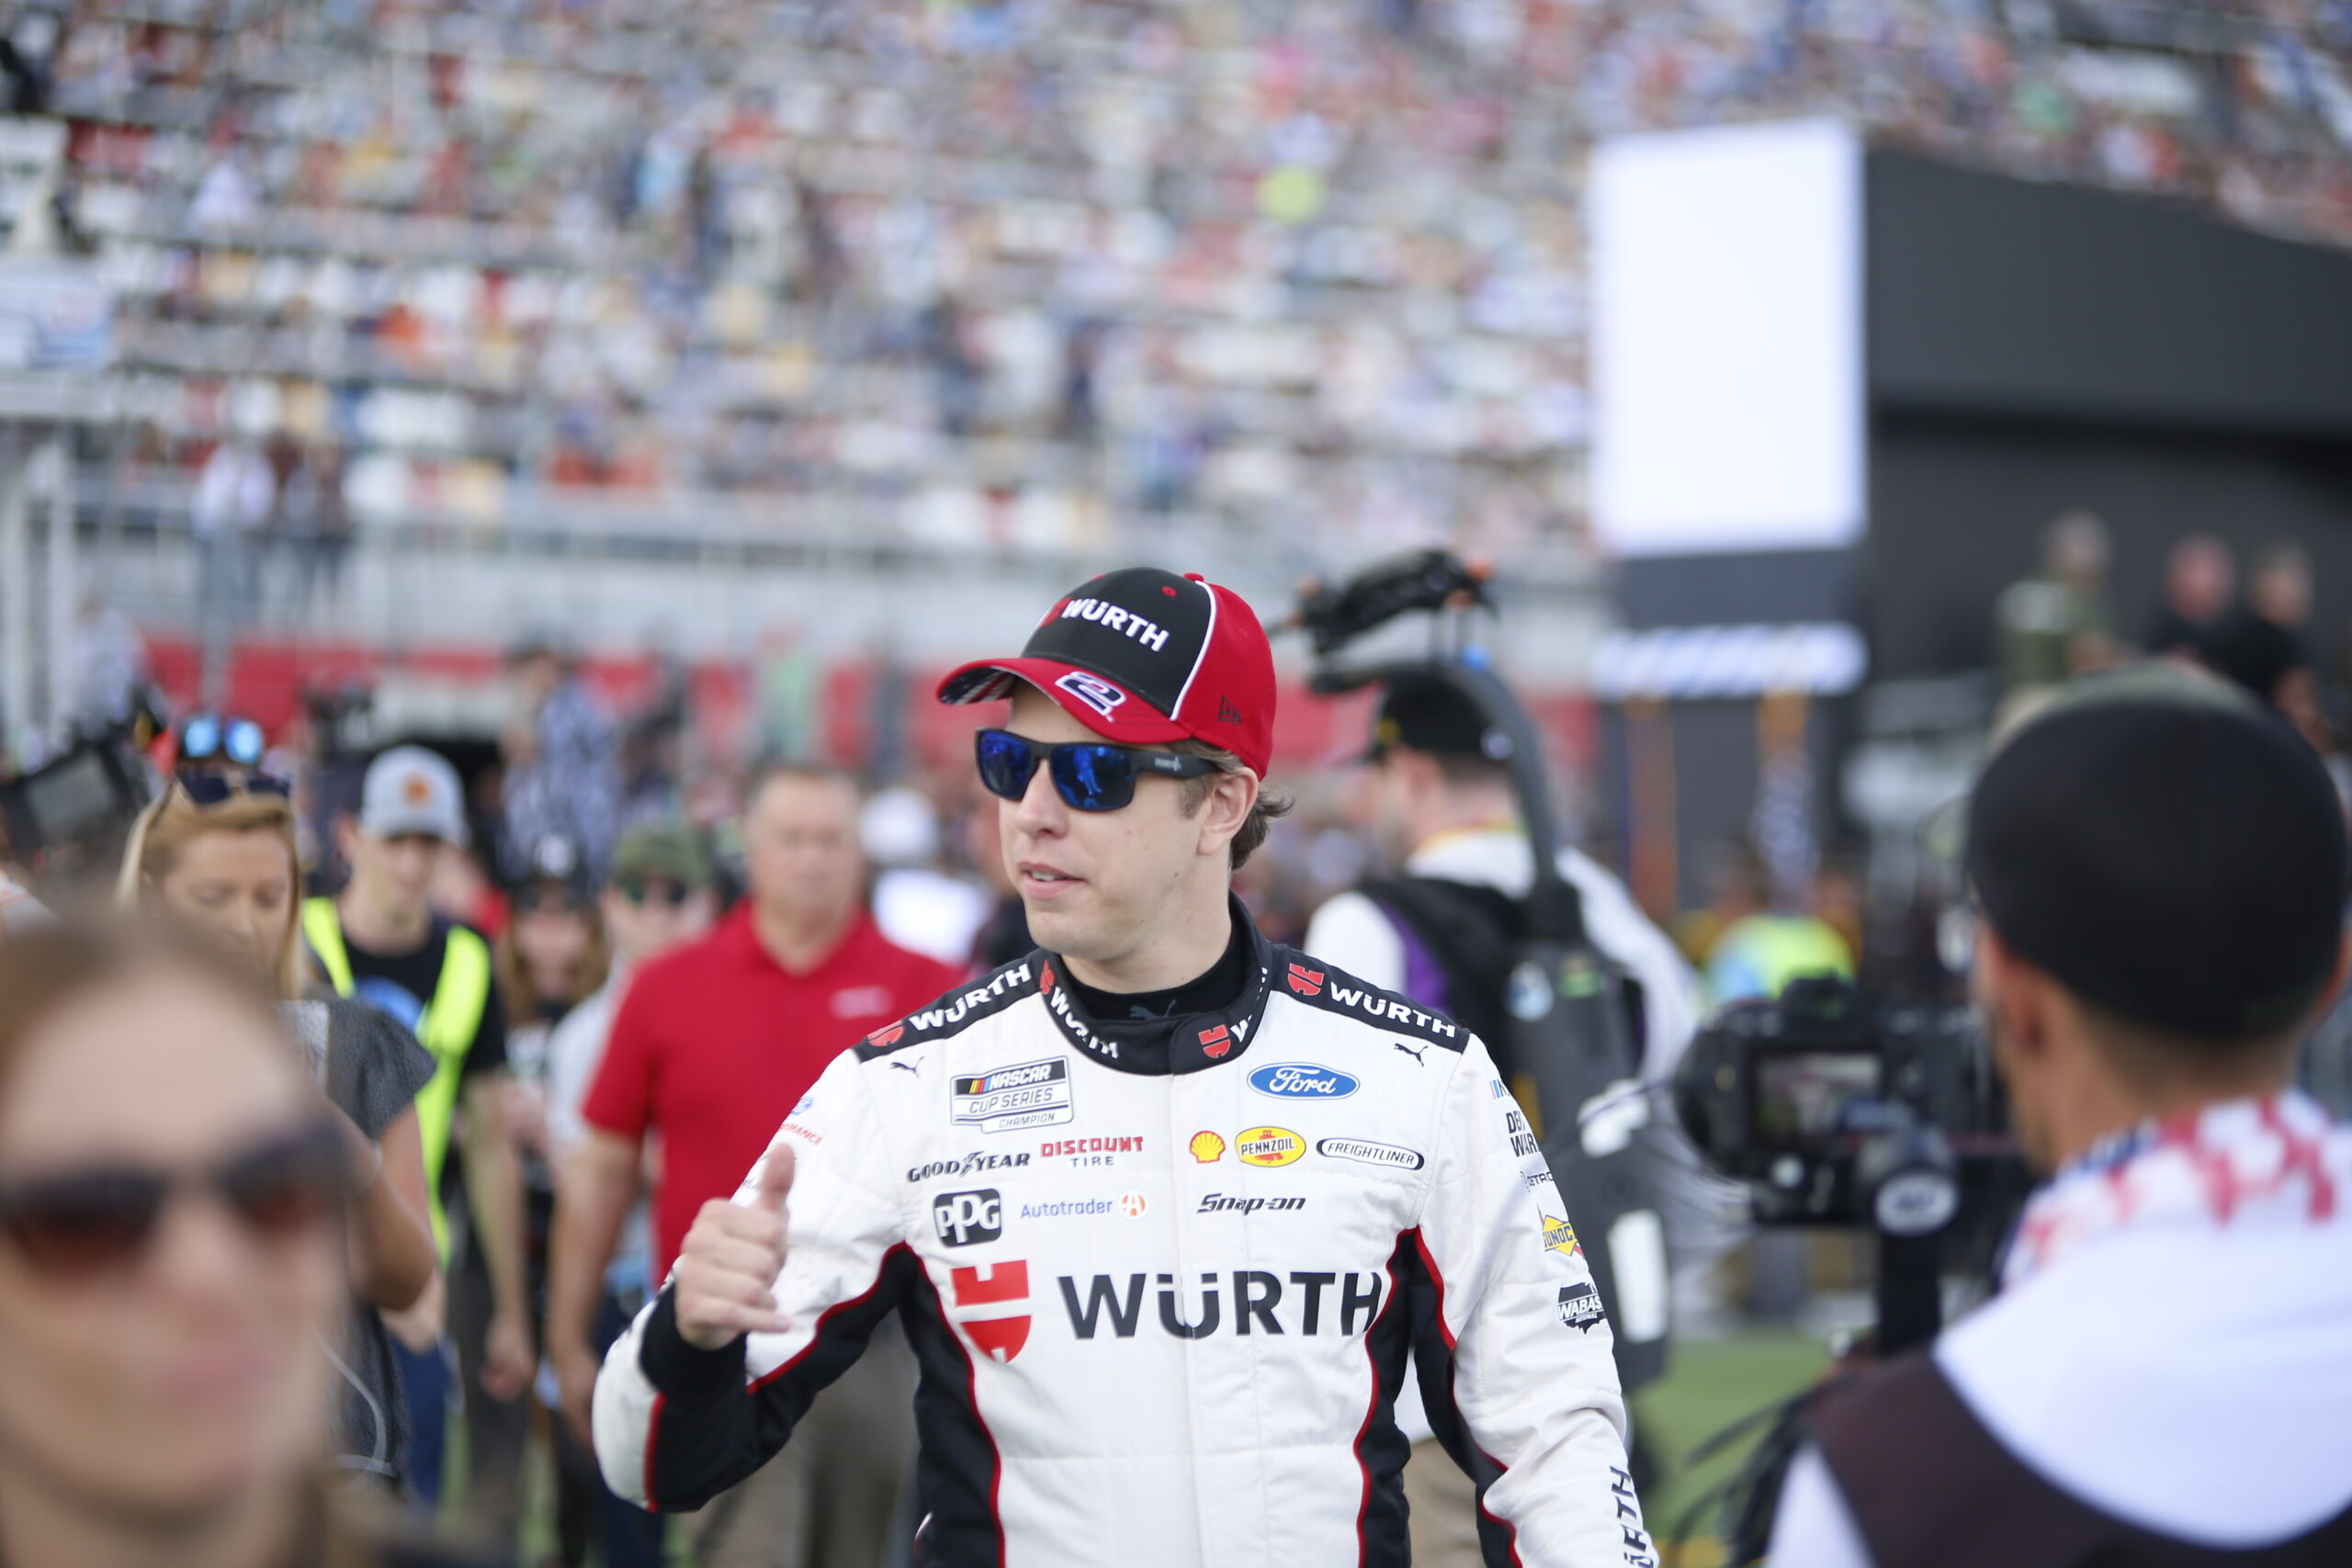 Keselowski's focus on the championship fight remains quite fervent. (Photo: Stephen Conley | The Podium Finish)